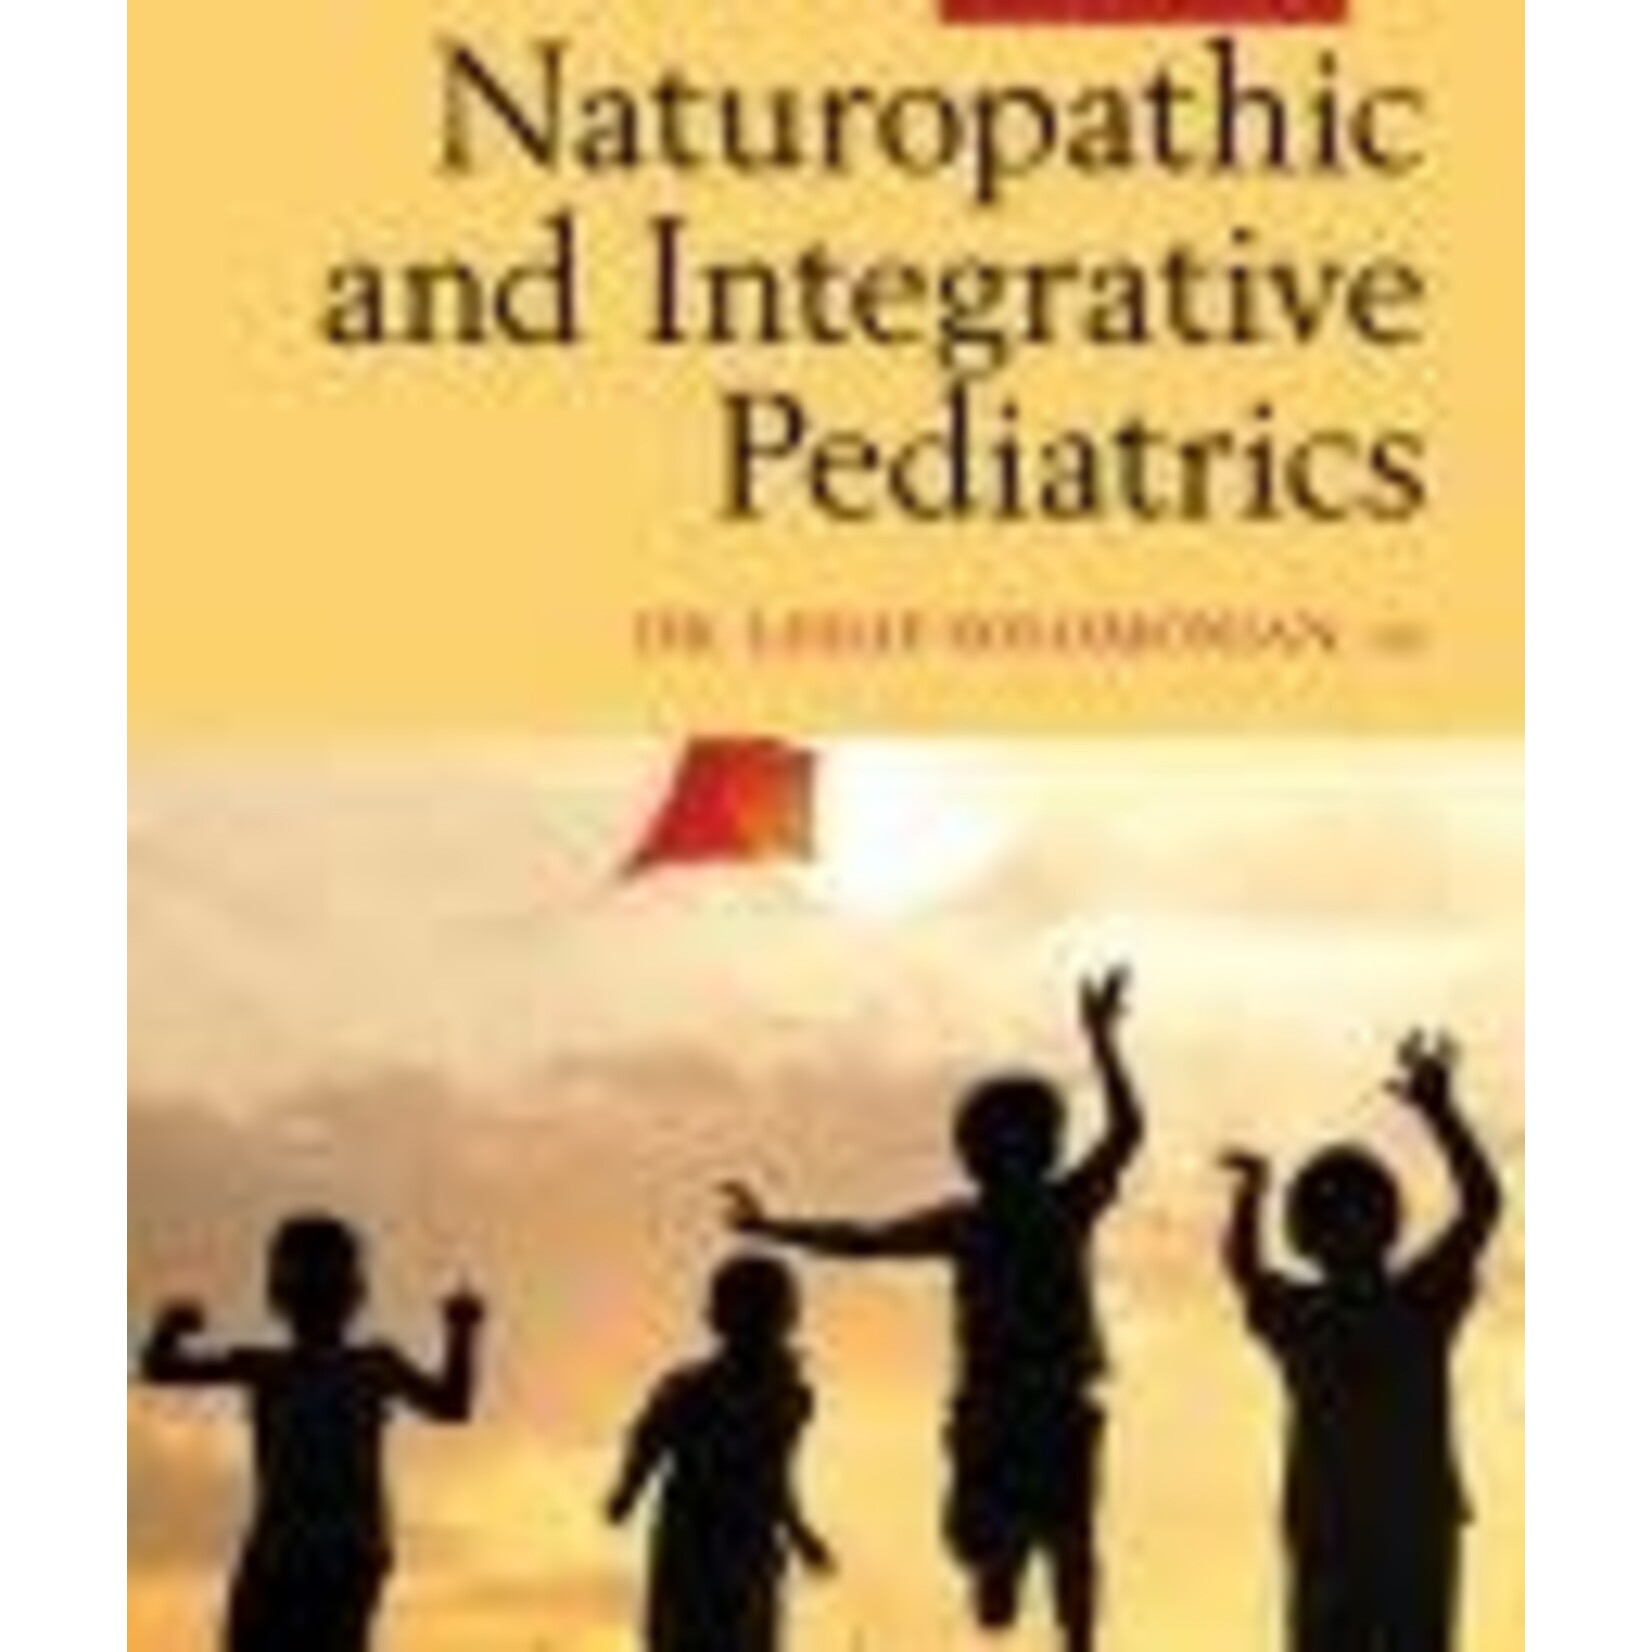 CCNM PRESS TEXTBOOK OF NATUROPATHIC AND INTEGRATIVE PEDIATRICS BY DR. LESLIE SOLOMONIAN